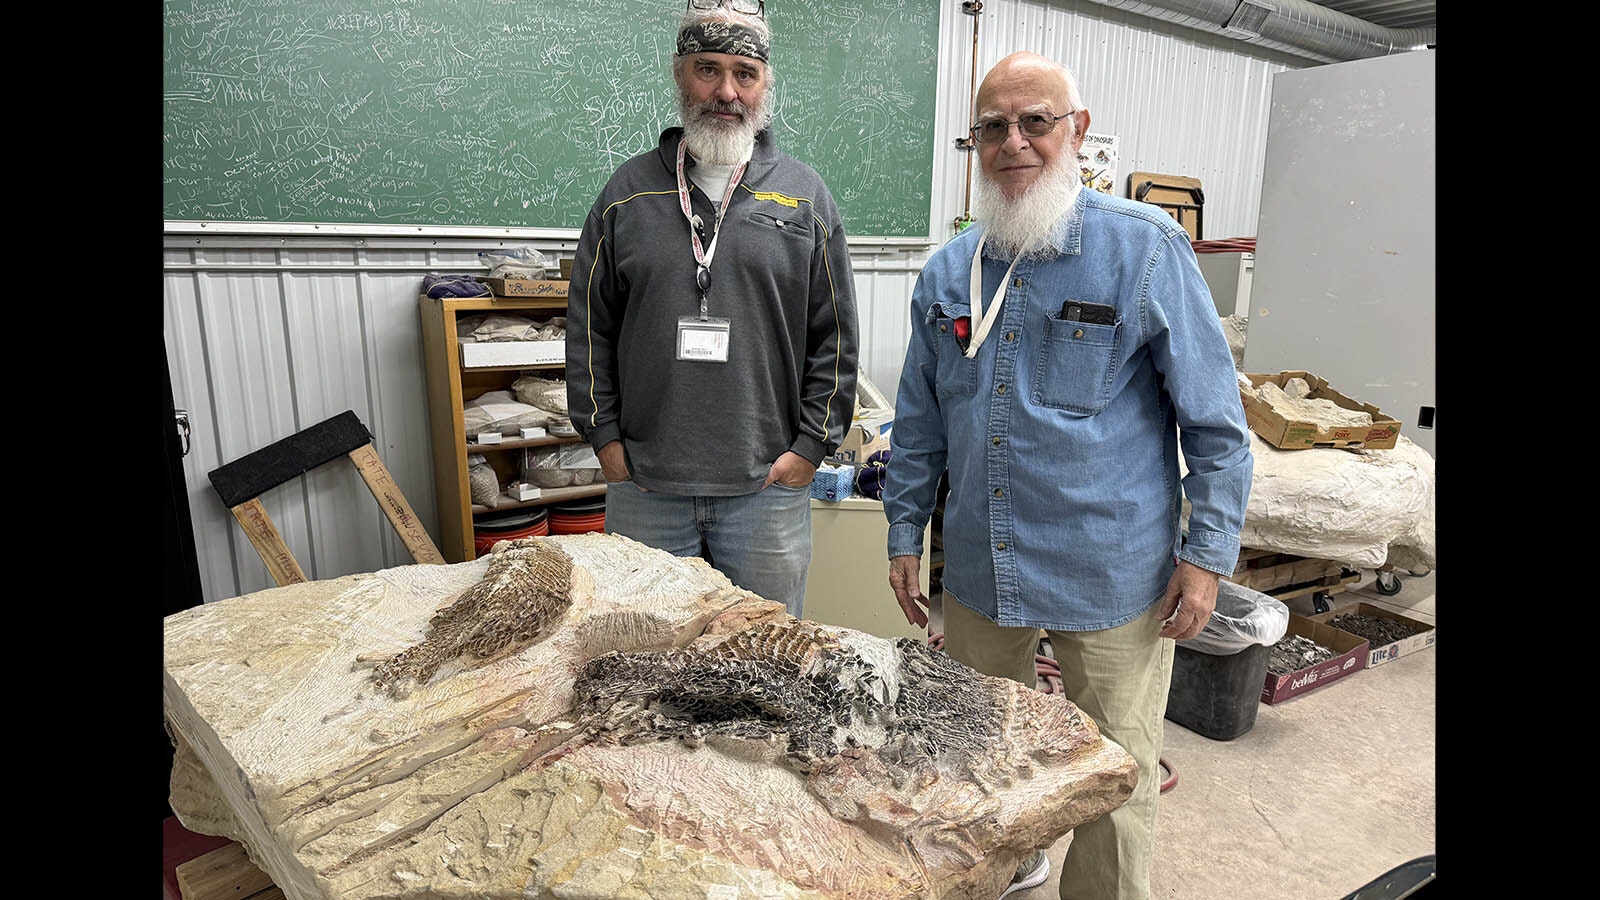 J.P. Cavigelli and Dwaine Wagoner with a sandstone block containing three 50 million-year-old gar skeletons from the Wasatch Formation. Wagoner spent 300 hours removing the sandstone encasing the remarkably well-preserved fossils found on a ranch in Converse County.